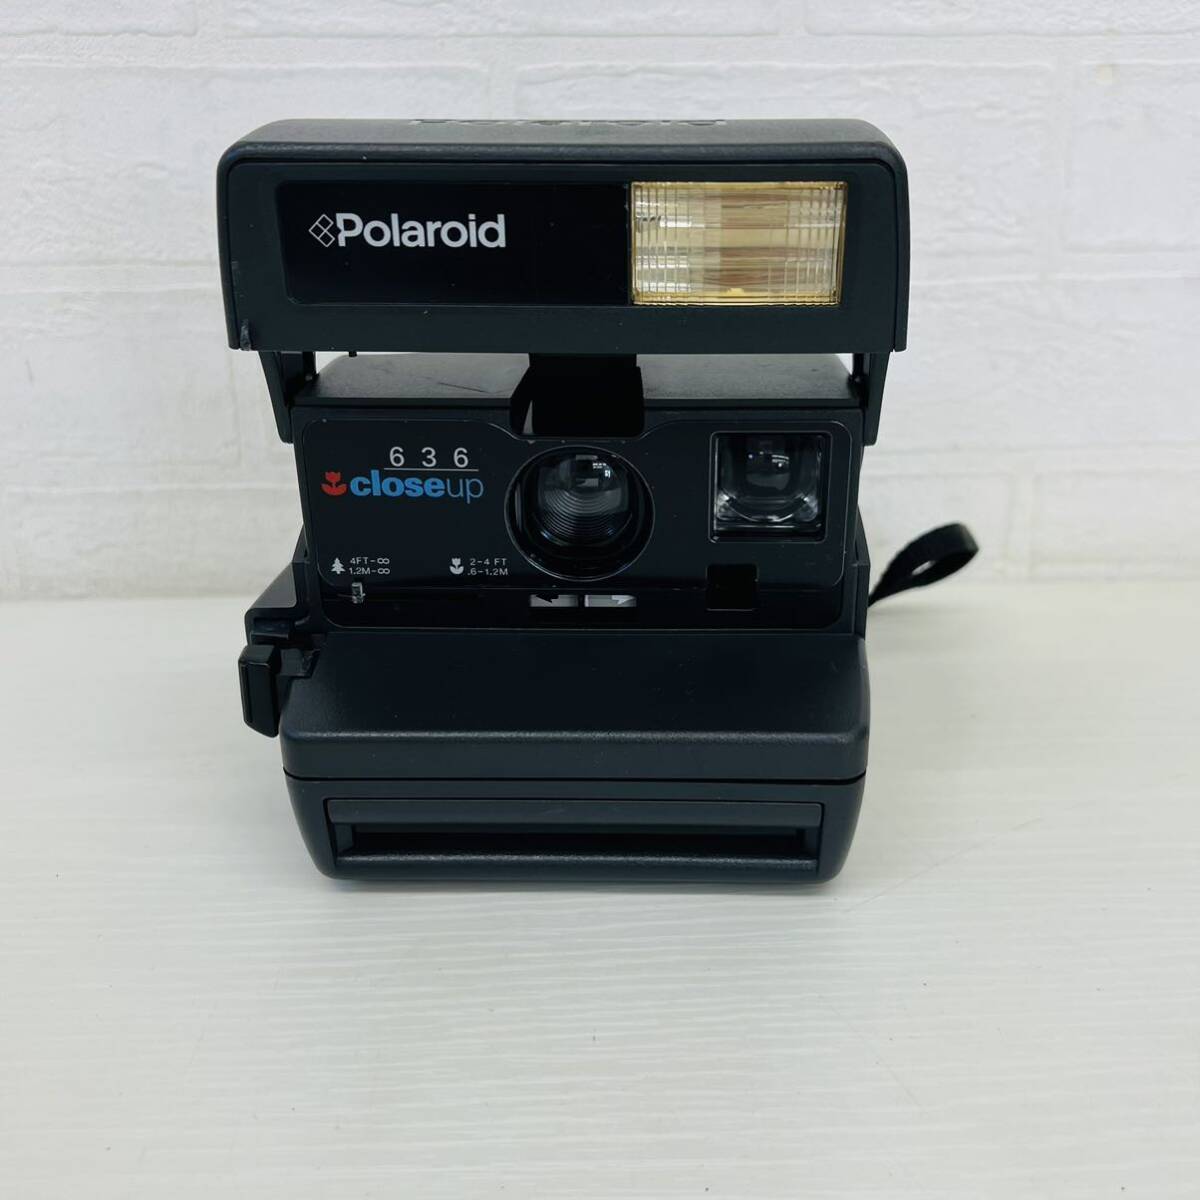 POLAROID Polaroid 636 Polaroid Polaroid camera retro camera that time thing close up IH